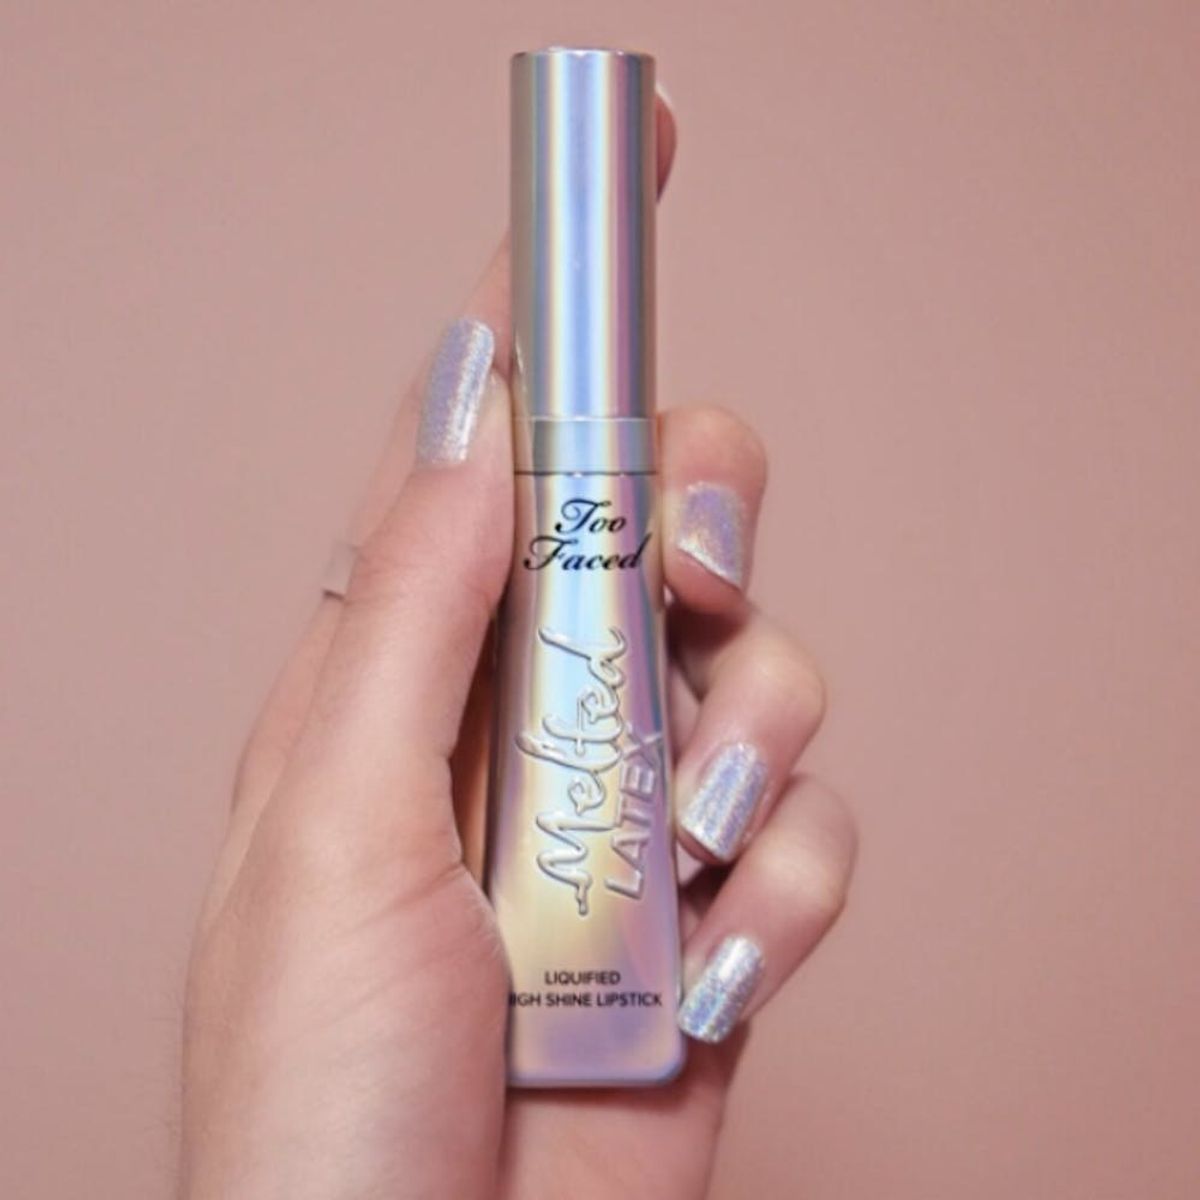 Too Faced’s Cult-Favorite Unicorn Tears Lipstick Is Coming in a Liquid Form